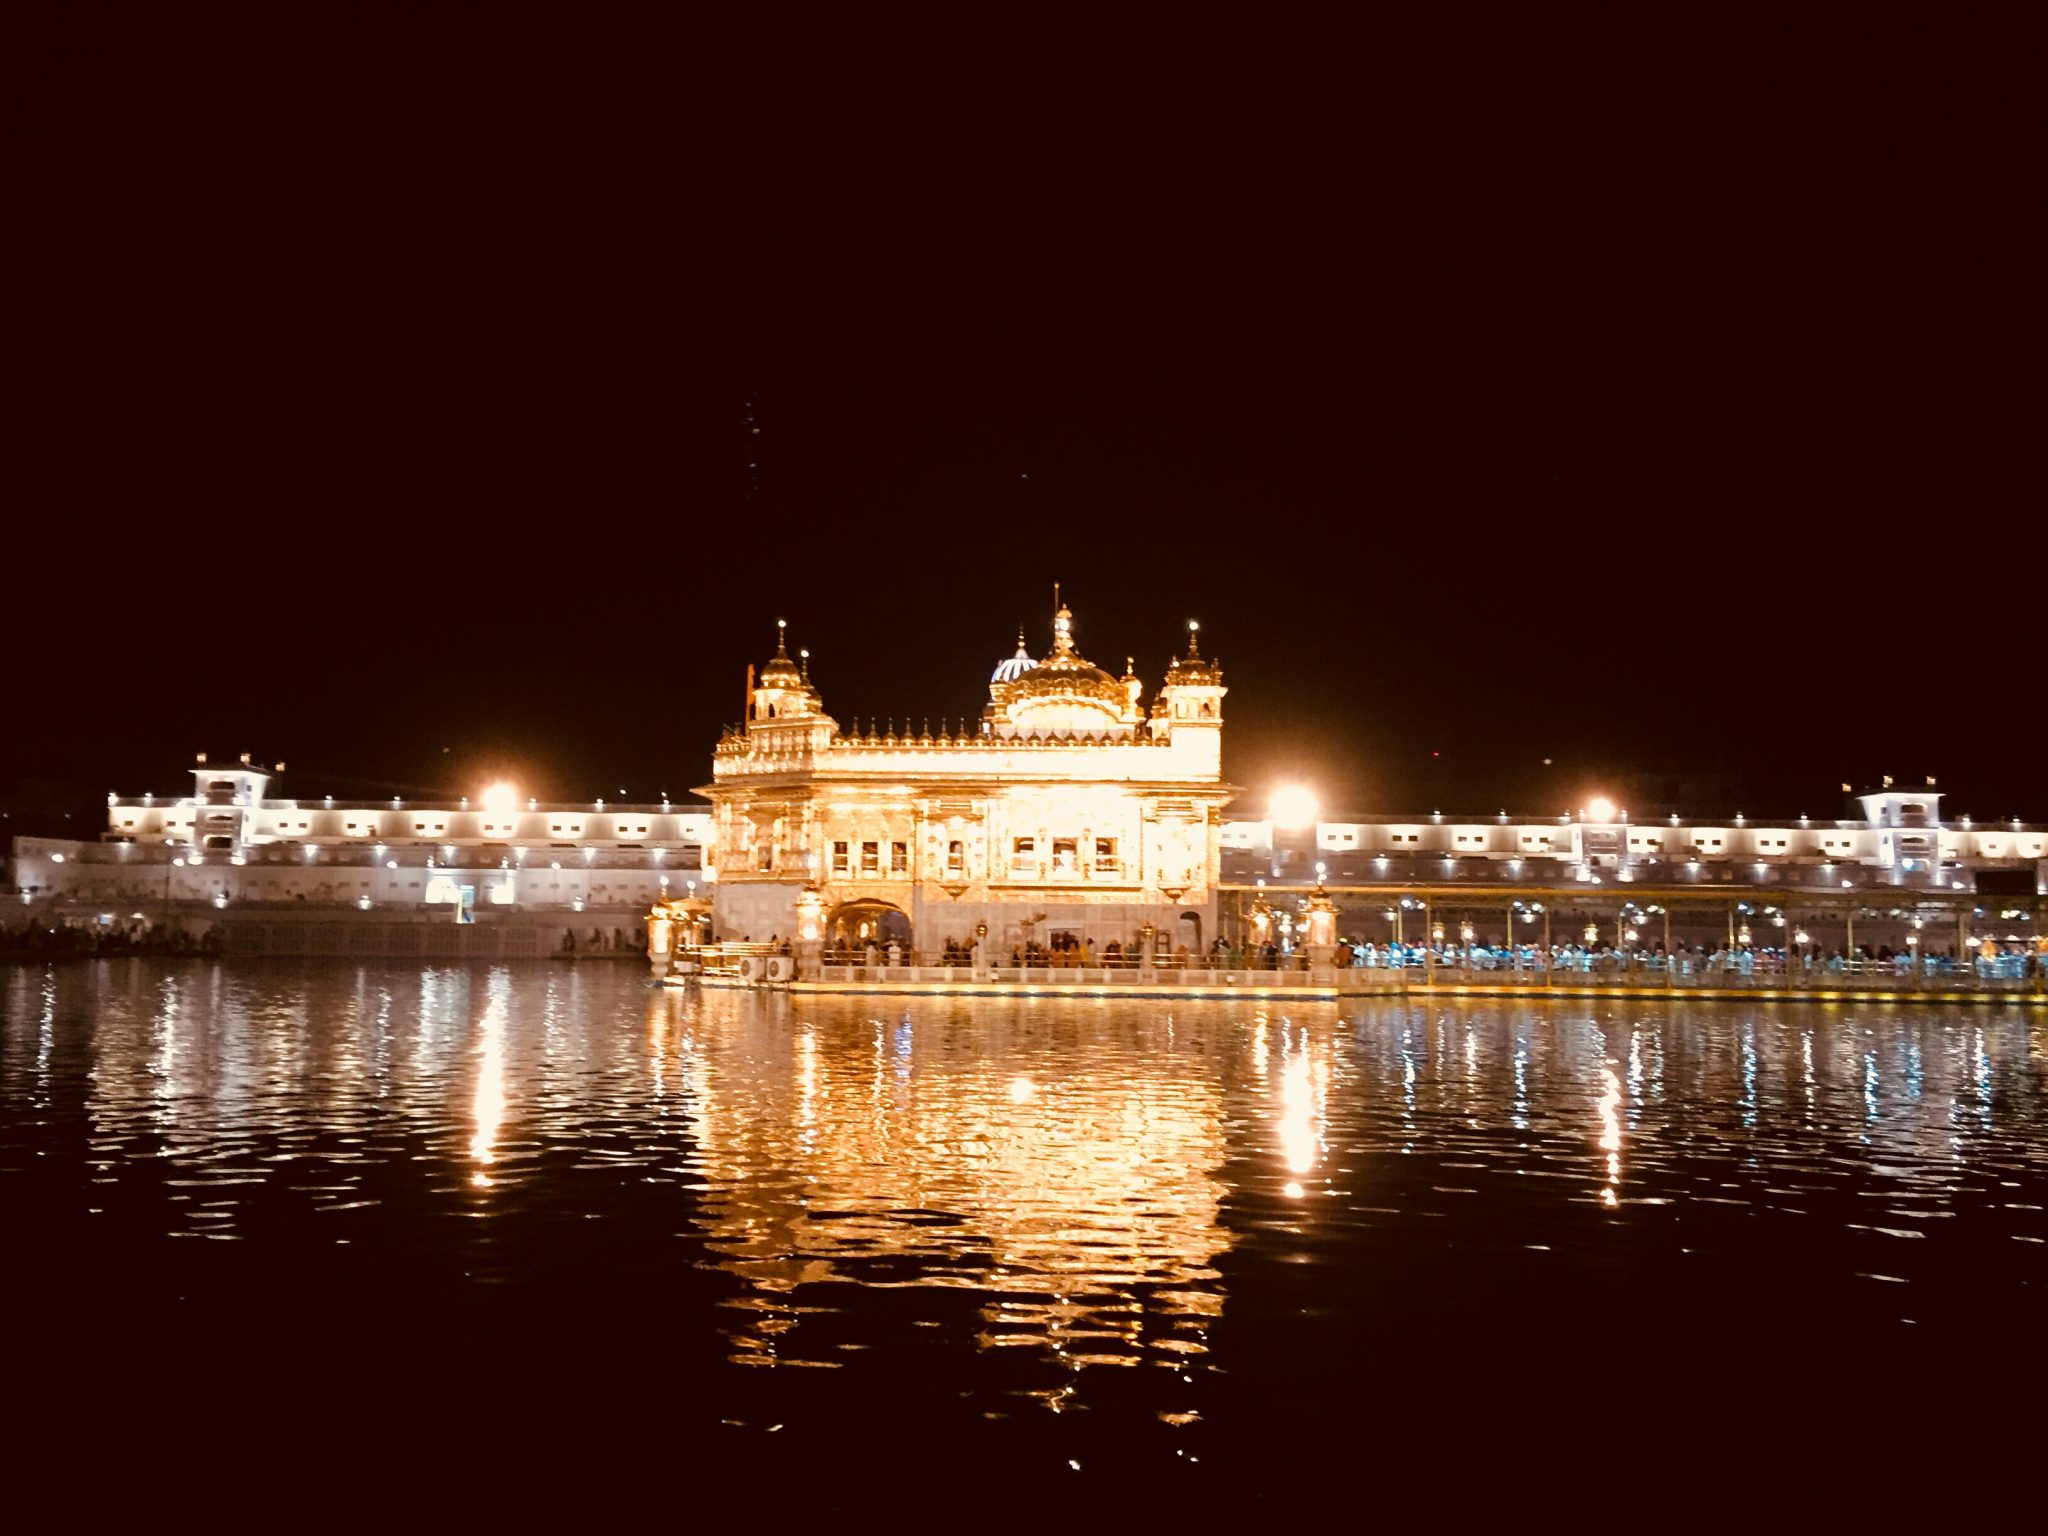 My experience of visiting Golden Temple Amritsar